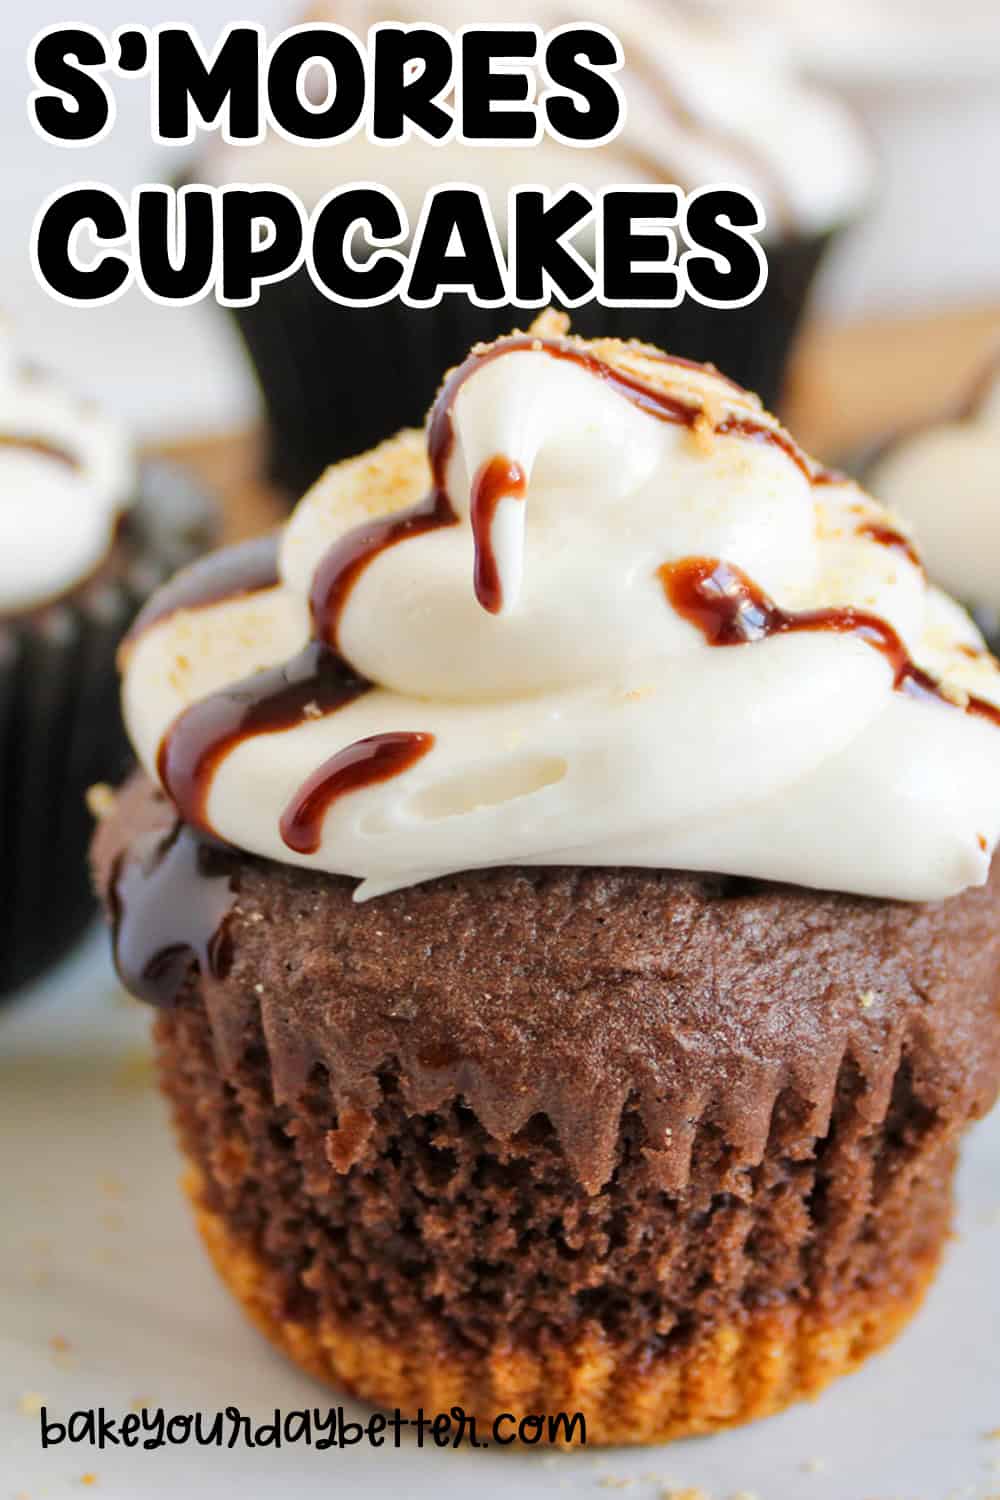 closeup picture of s'mores cupcake with text overlay that says: s'mores cupcakes